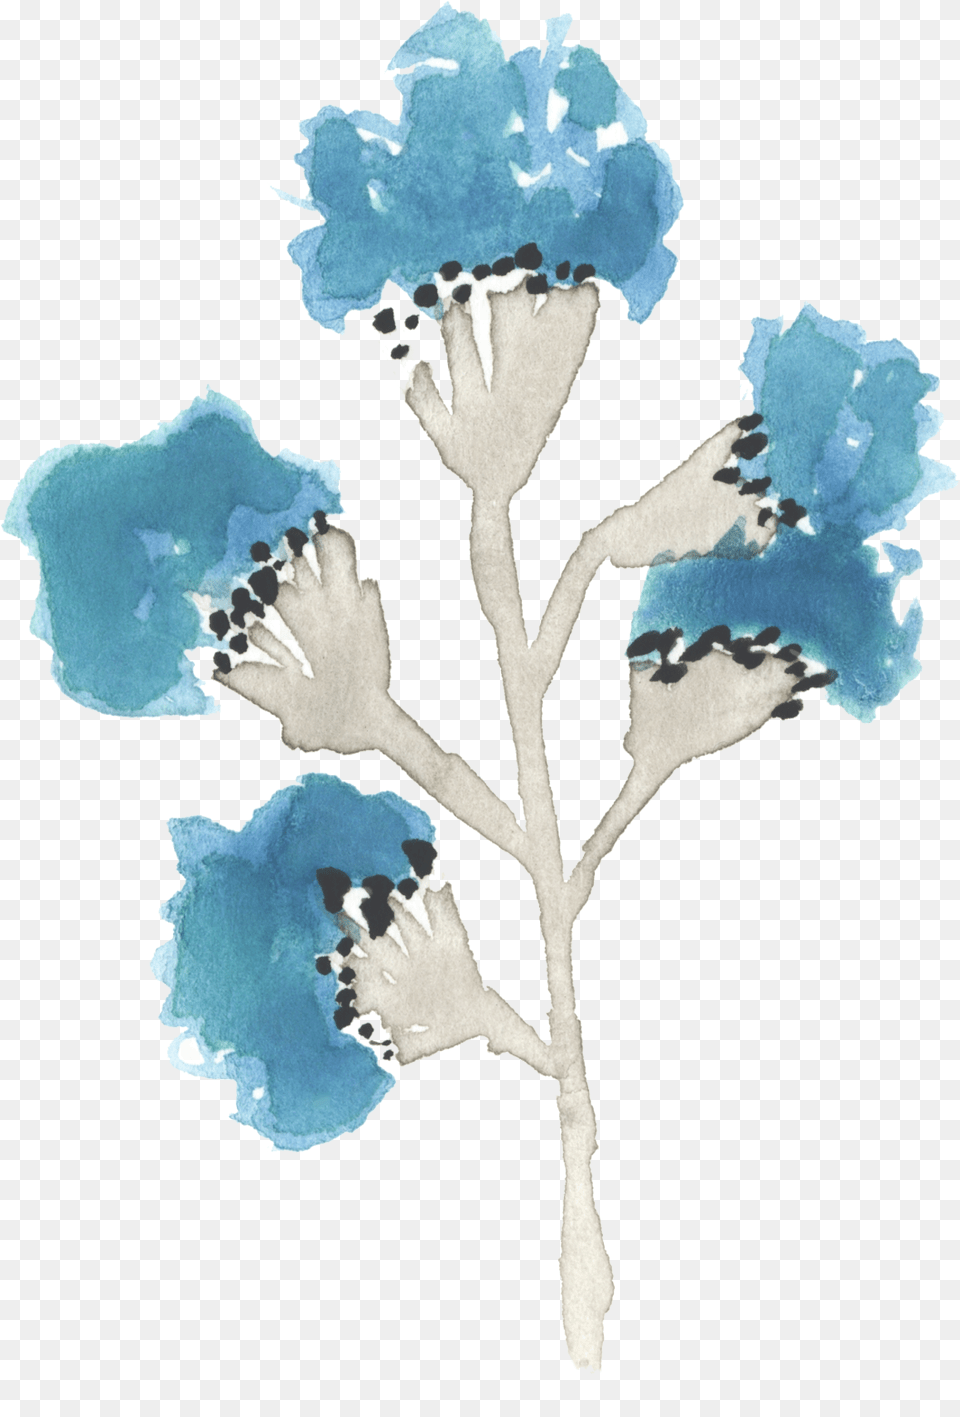 Download Hd Goofy Image Nicepngcom Watercolor Paint, Art, Painting, Leaf, Plant Free Transparent Png